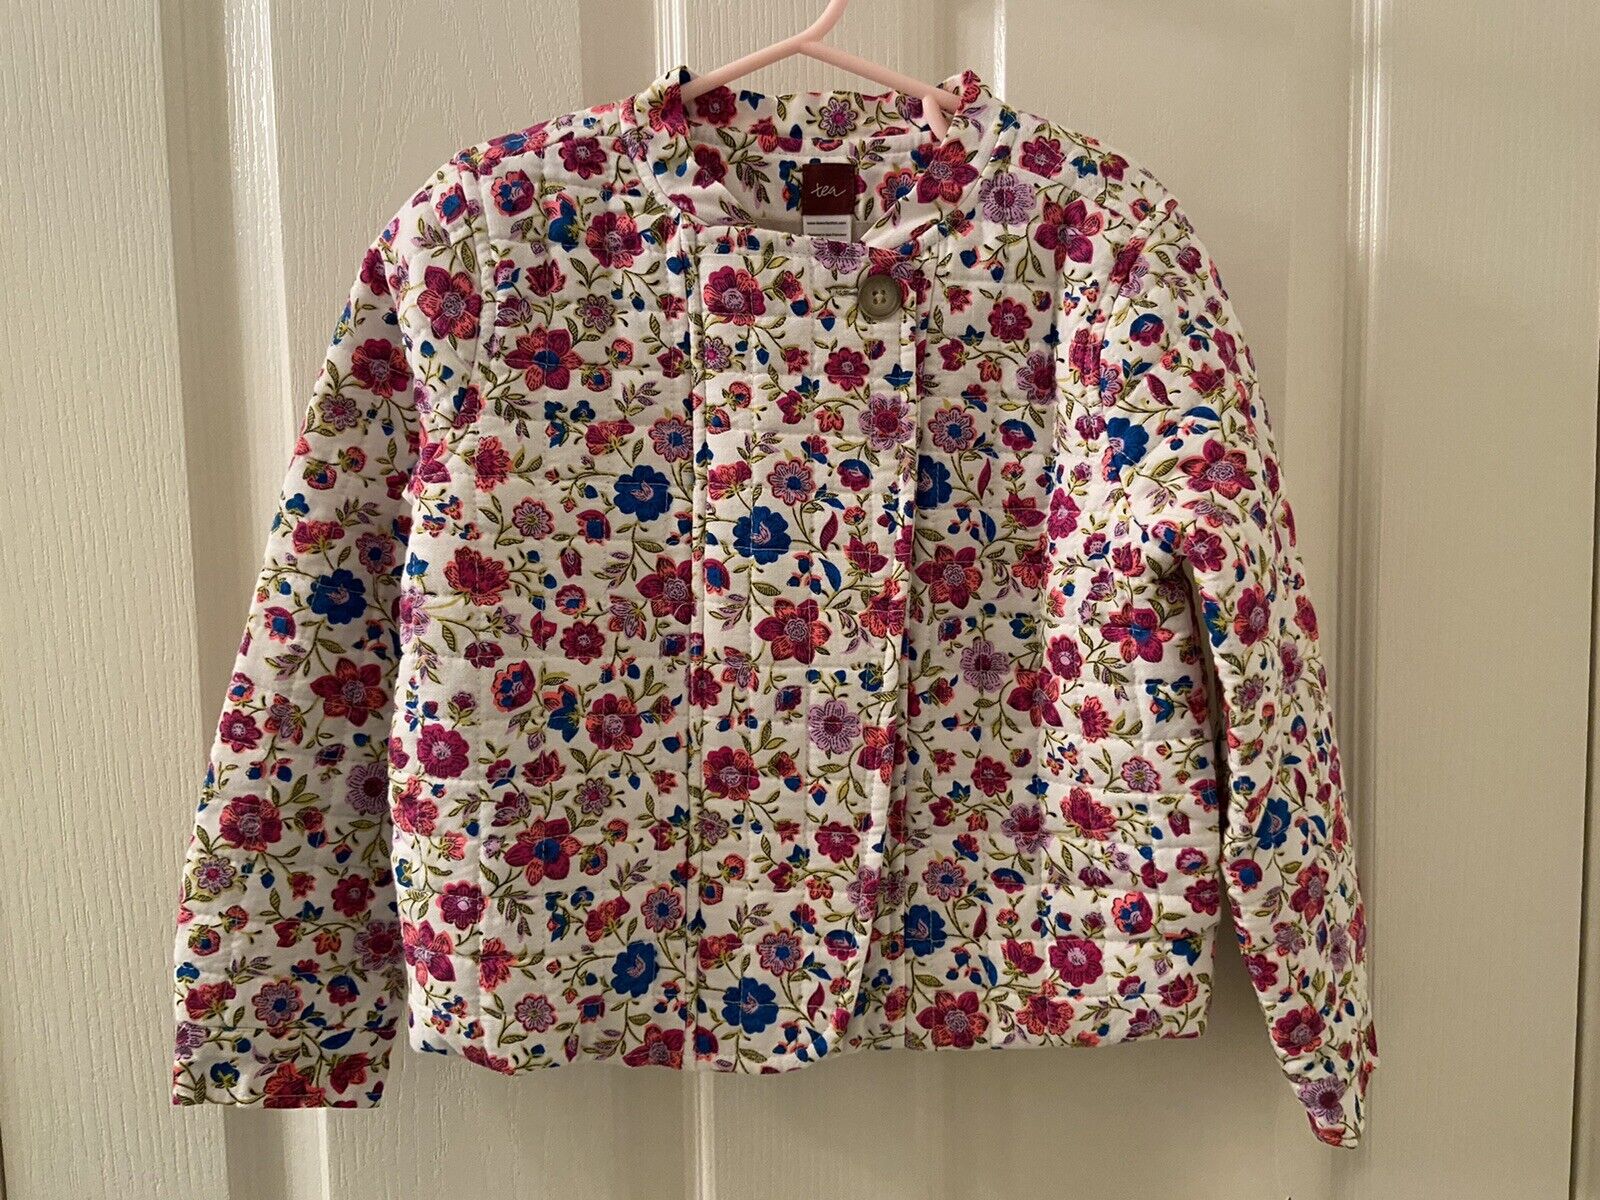 Tea Collection Mercado Rodriguez Floral Quilted Jacket Girls Size Small 4-5 NWT Tea Collection Mercado Rodriguez Jacket